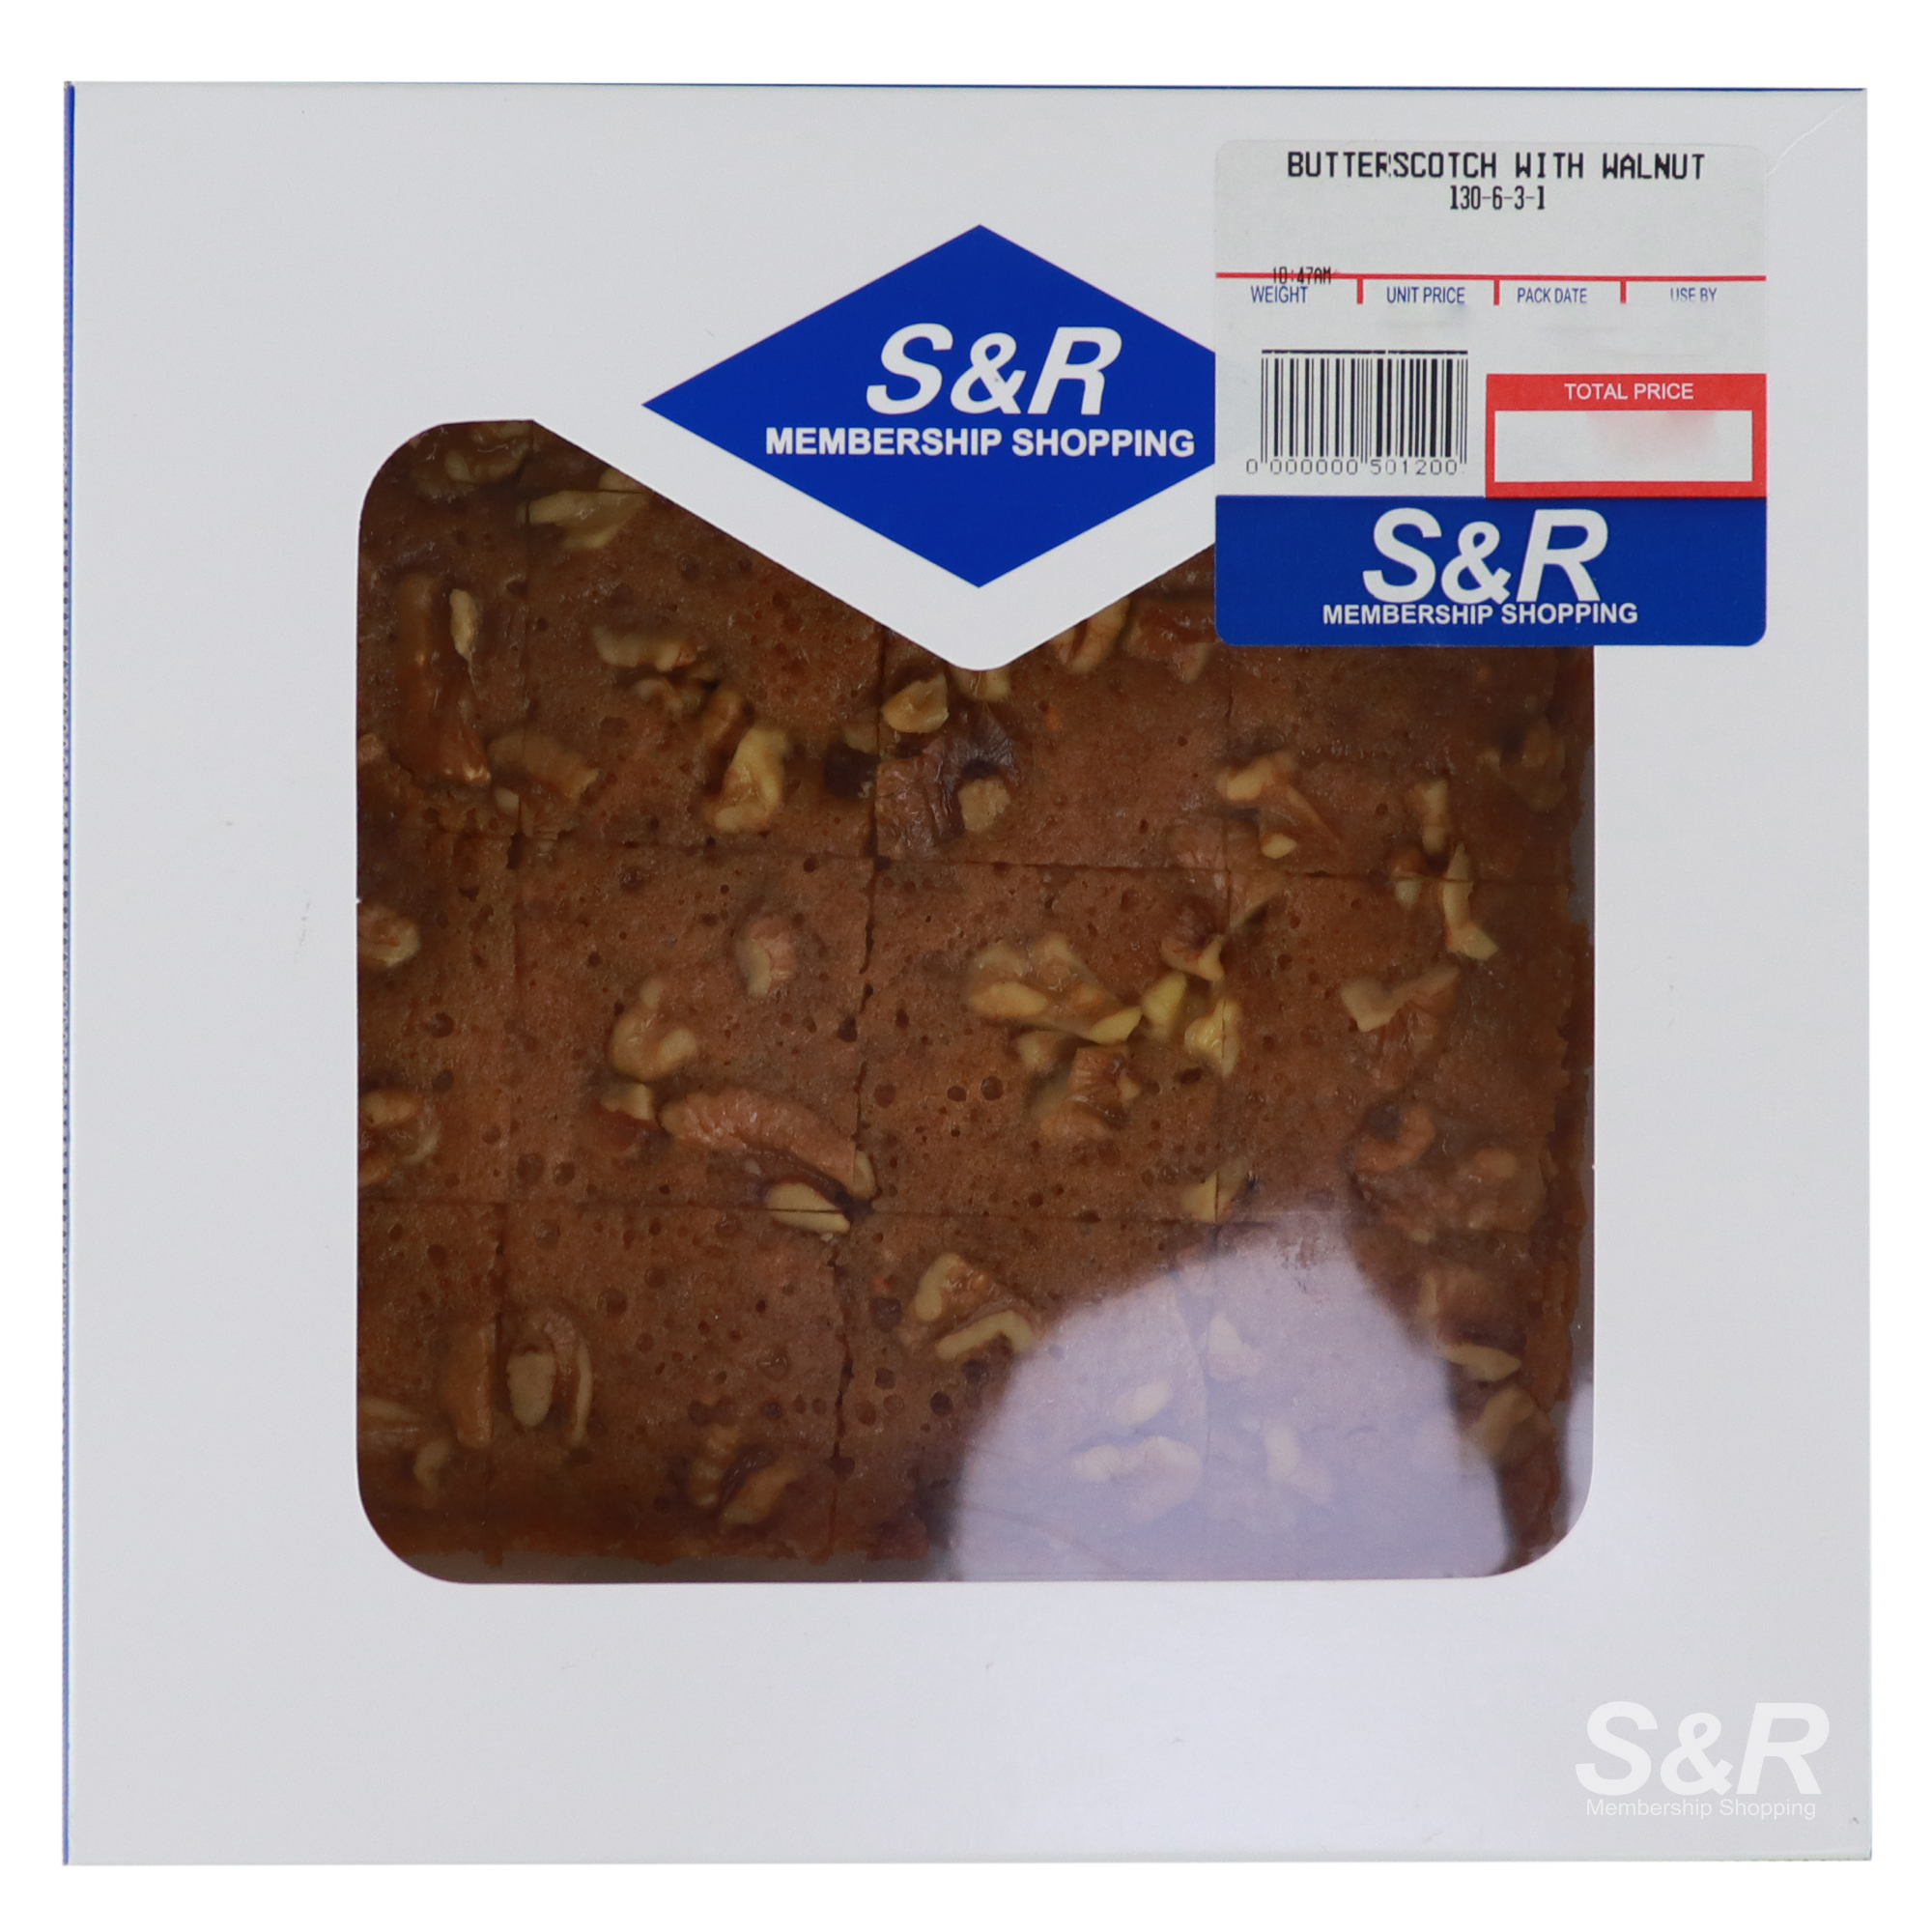 S&R Butterscotch with Walnut Bars 1pc